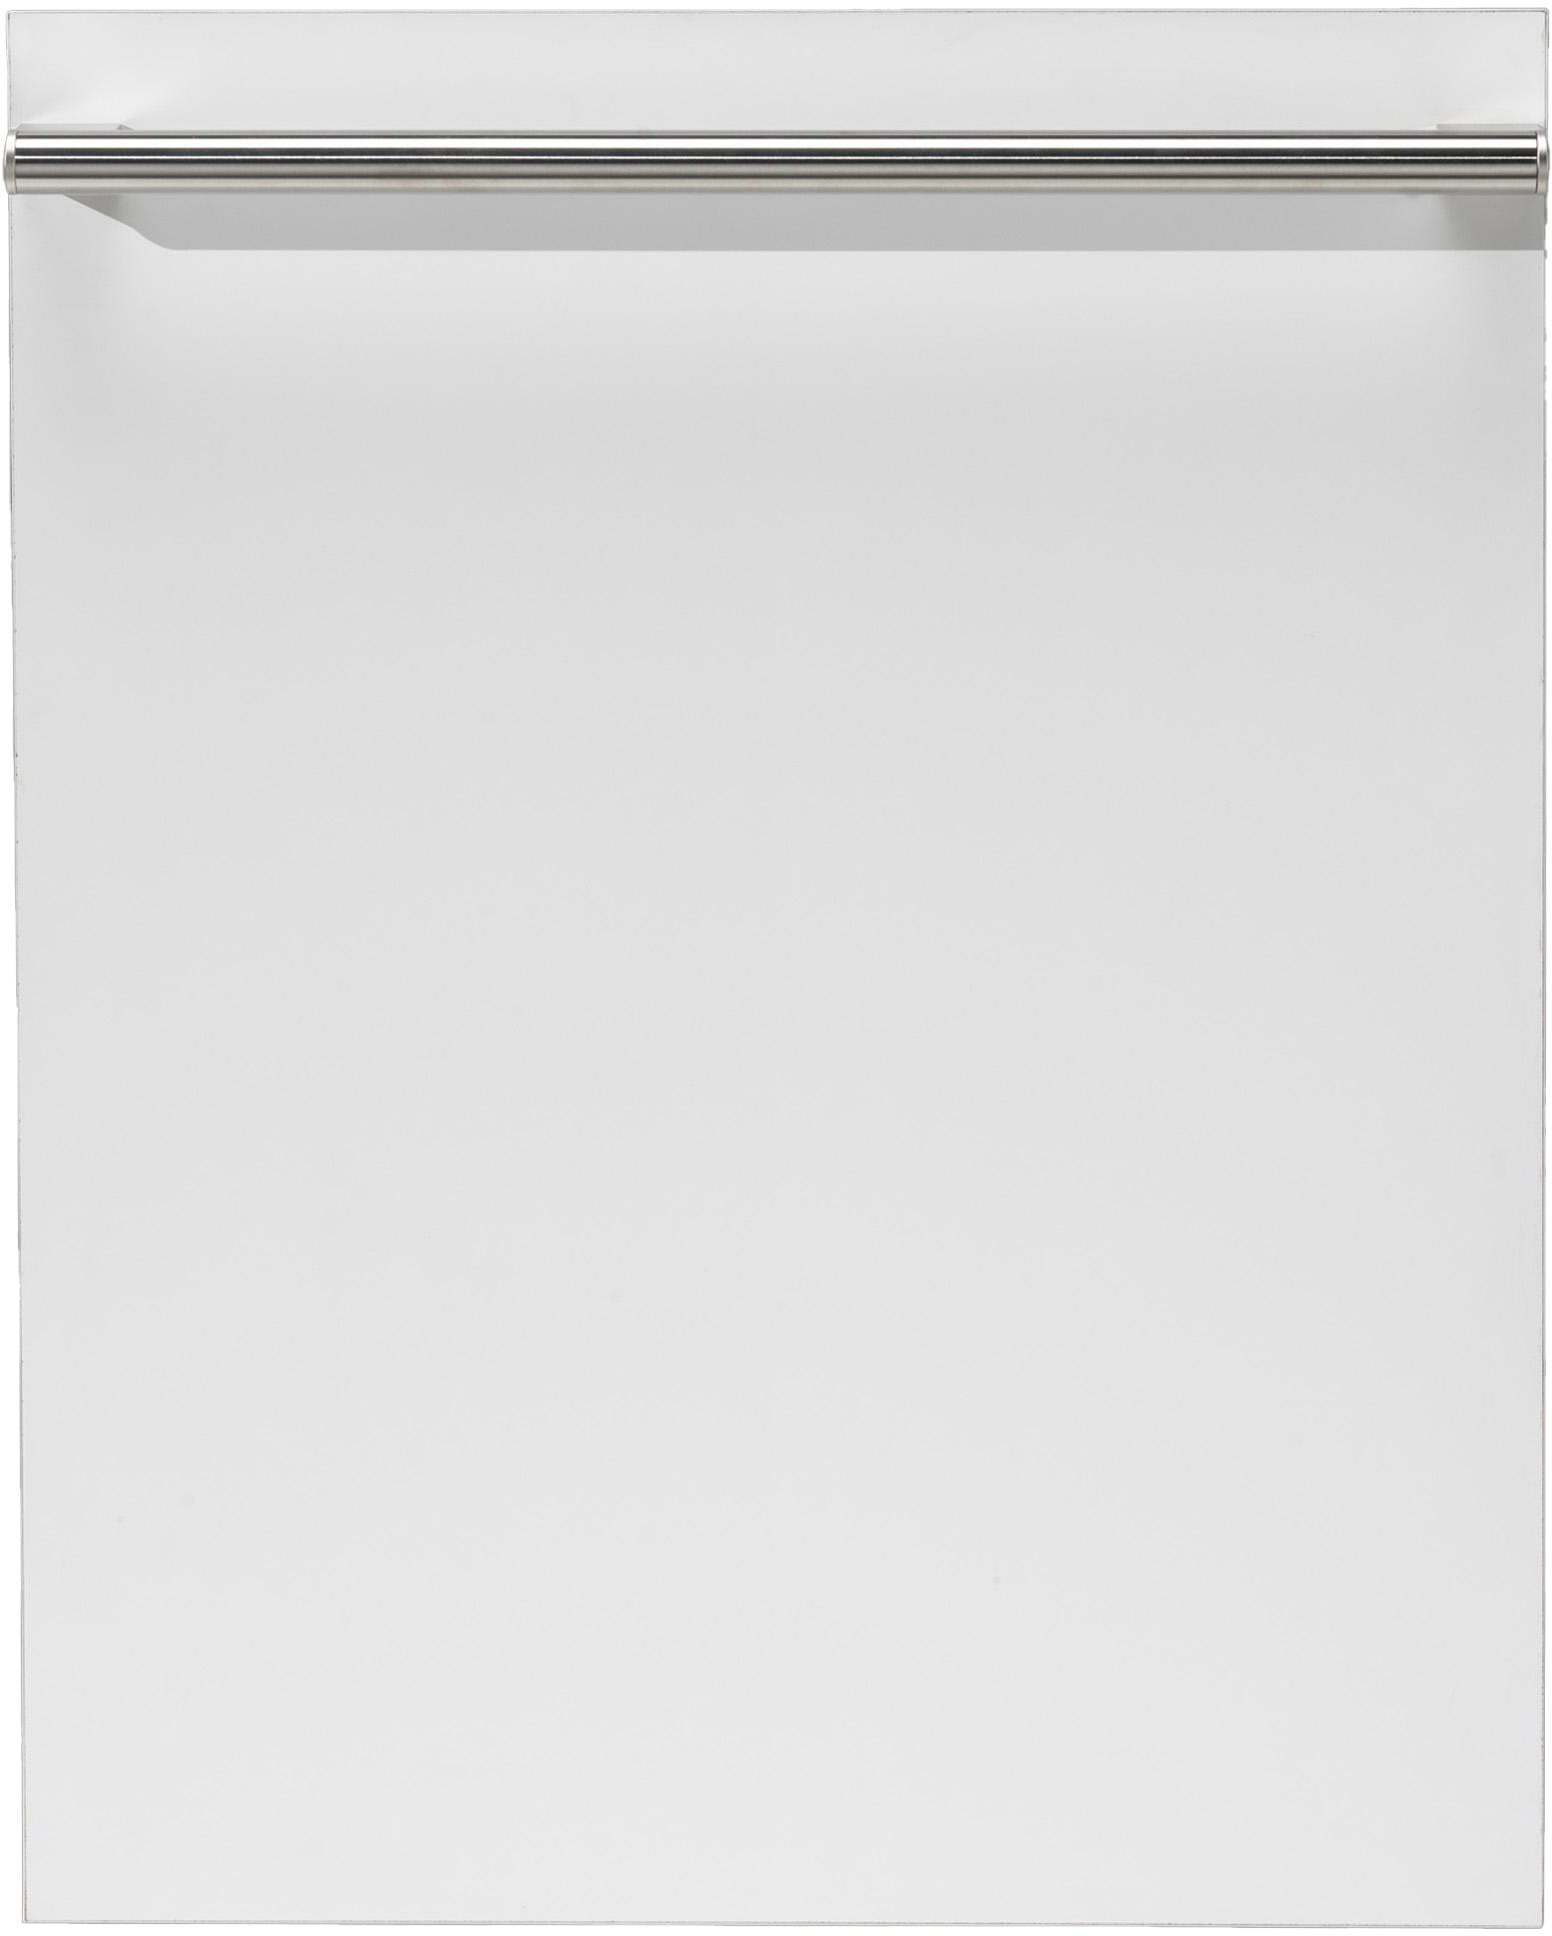 24 Inch Fully Integrated Panel Ready Dishwasher